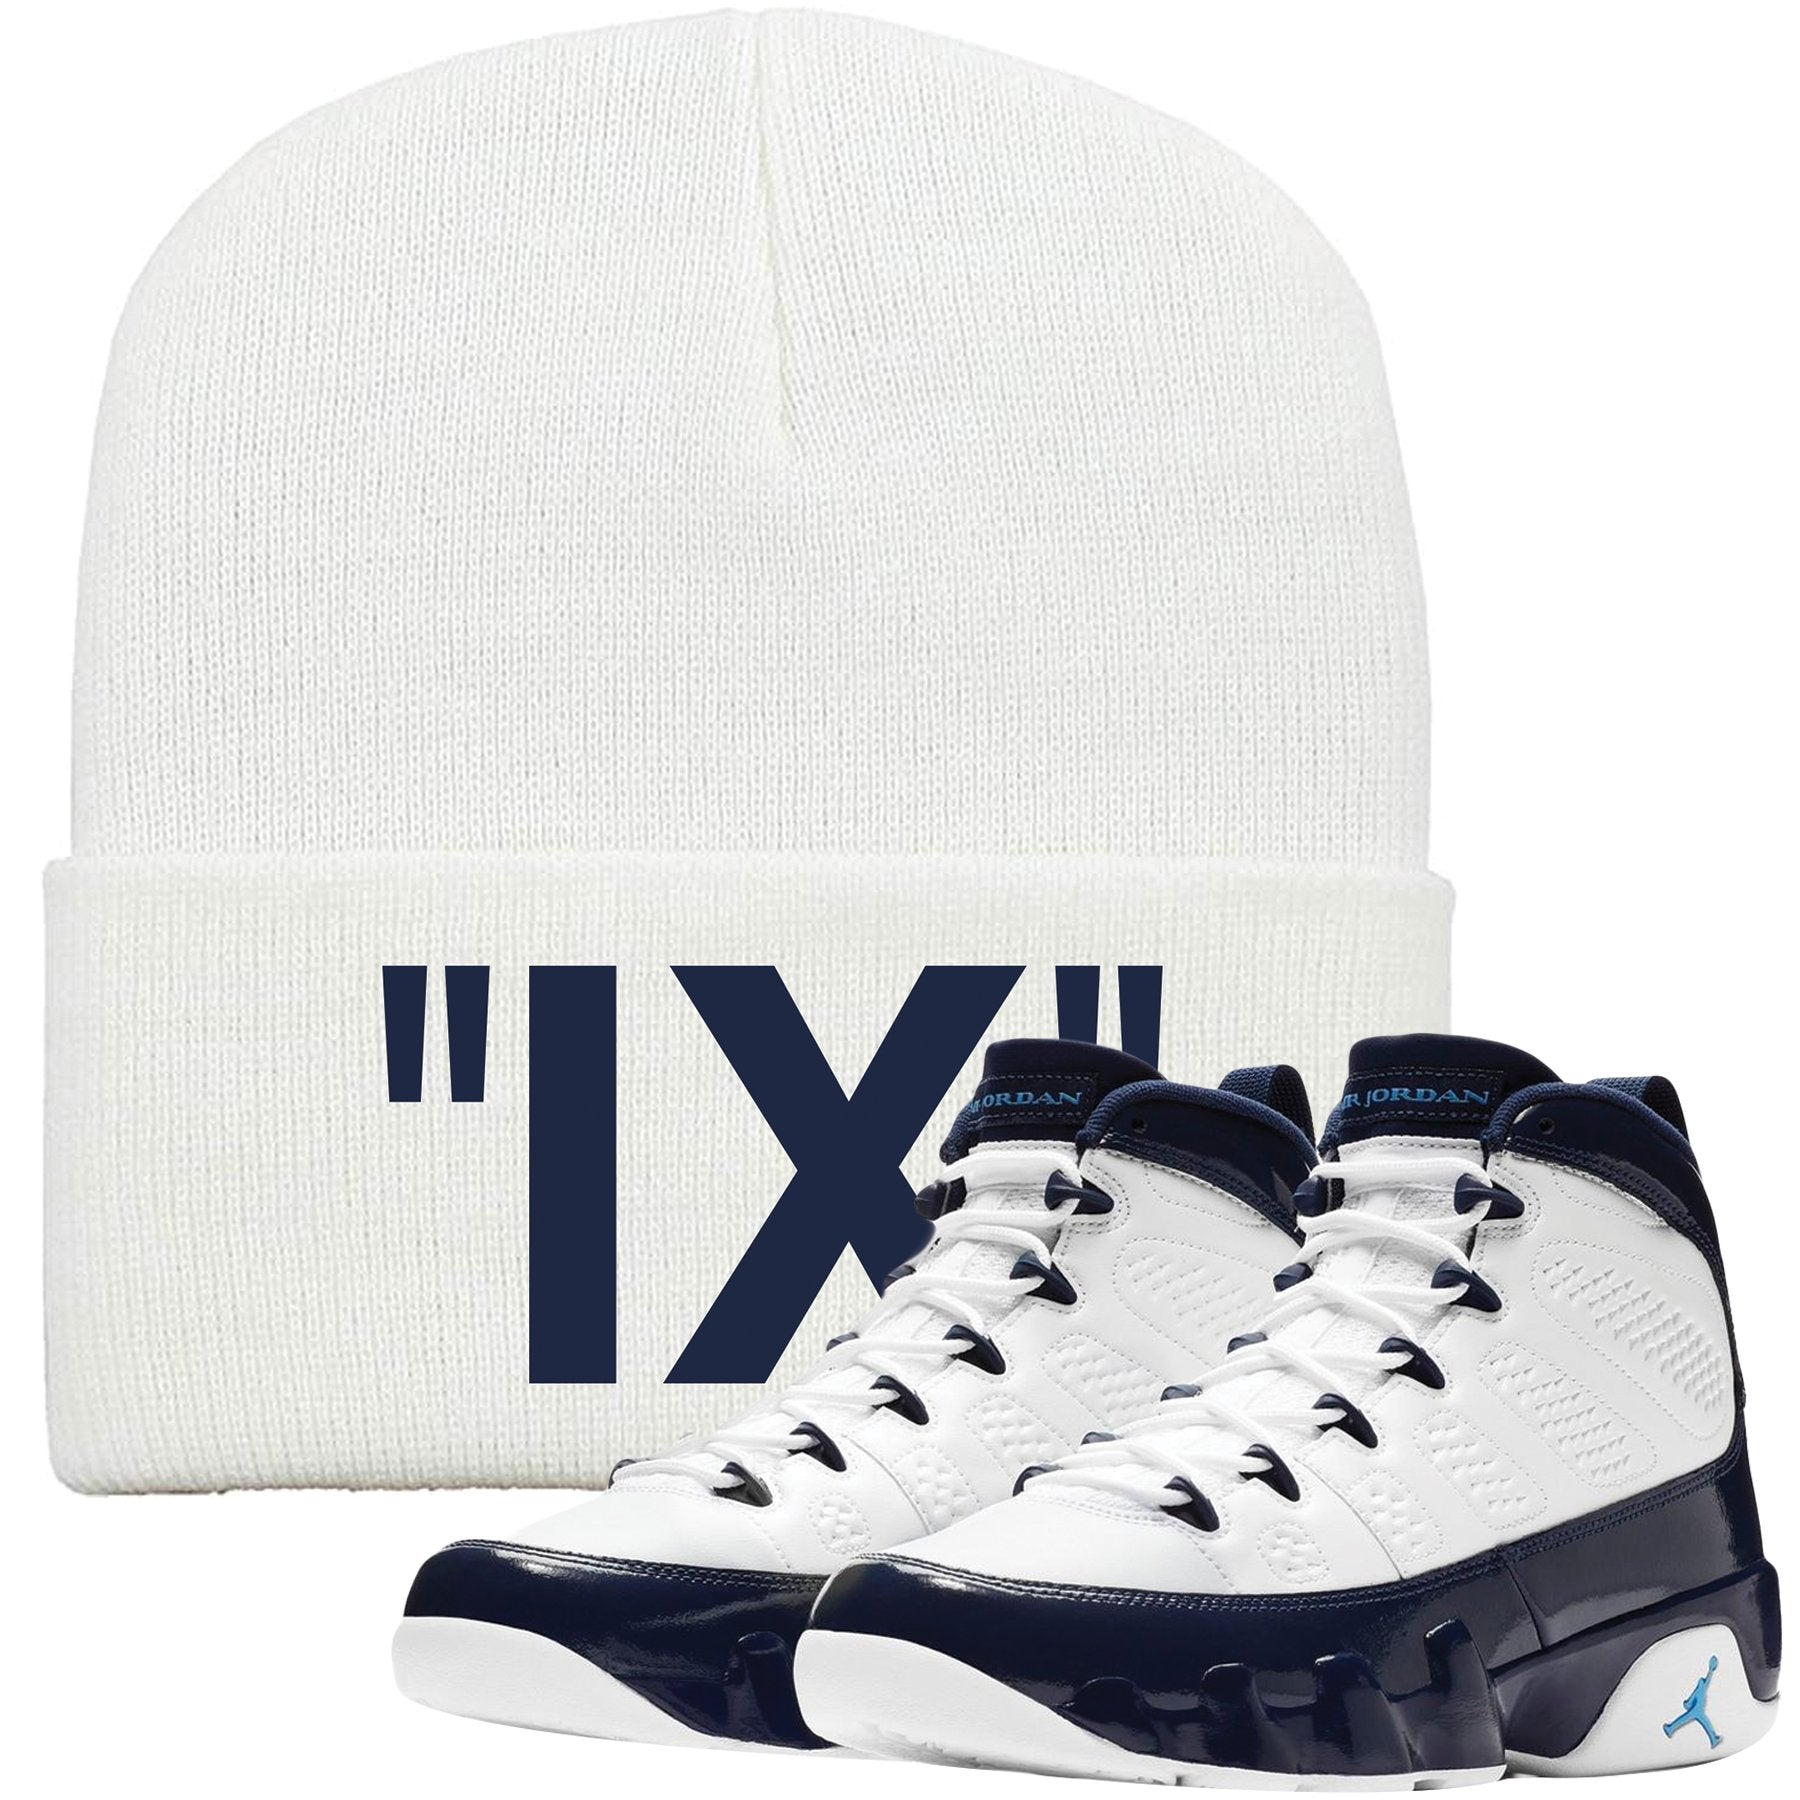 This Jordan 9 UNC All Star Blue Pearl sneaker matching winter beanie is perfect for matching the Jordan 9 UNC  Blue Pear sneakers